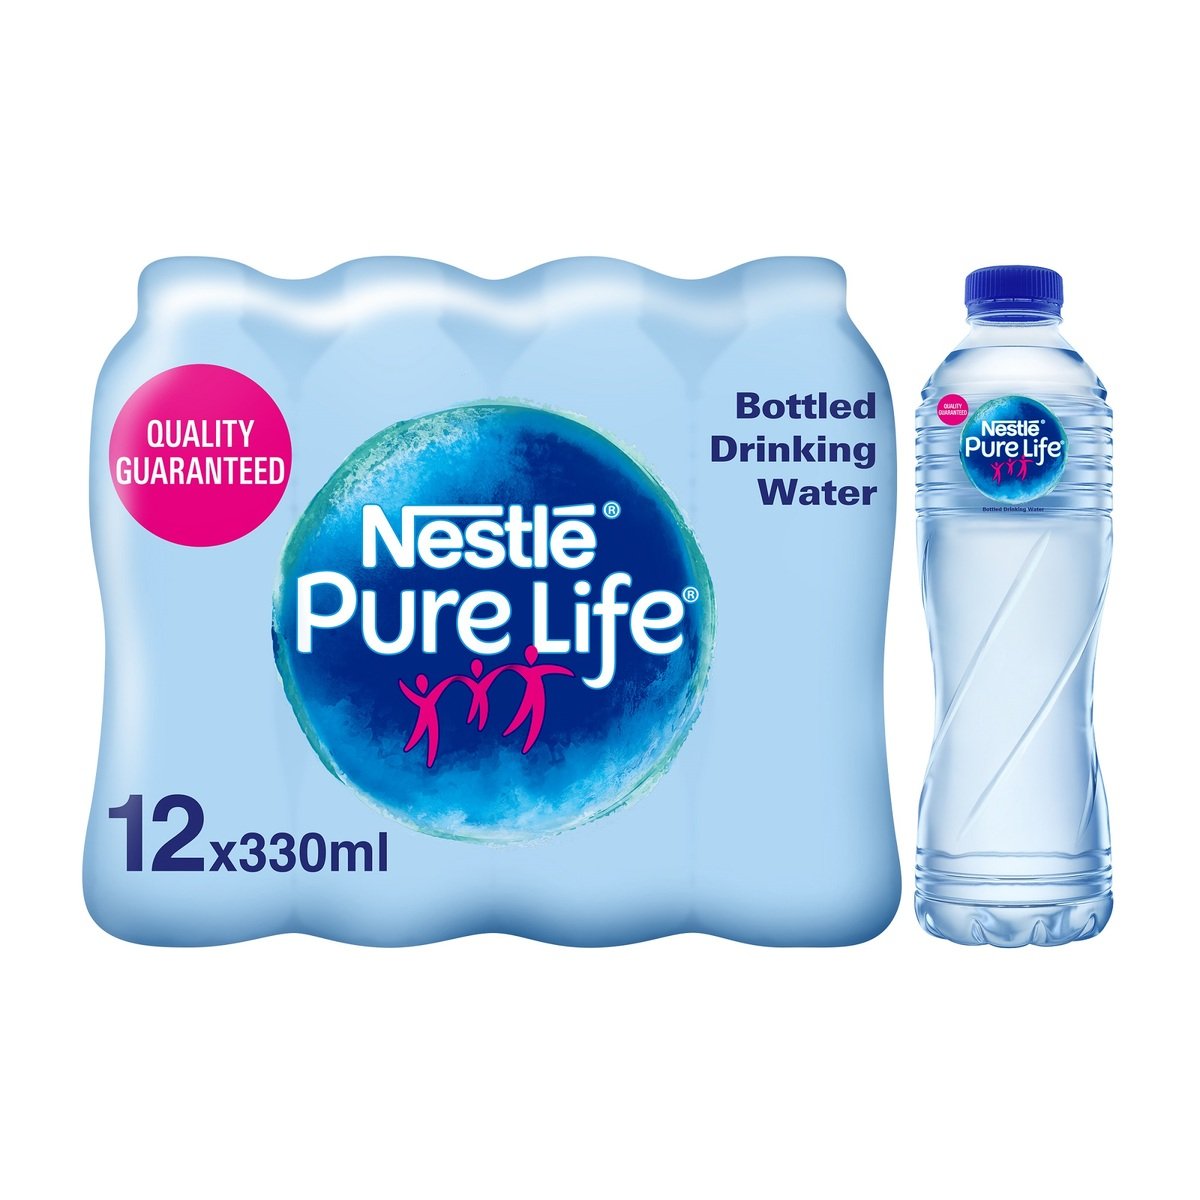 Nestle Pure Life Bottled Drinking Water 12 x 330 ml